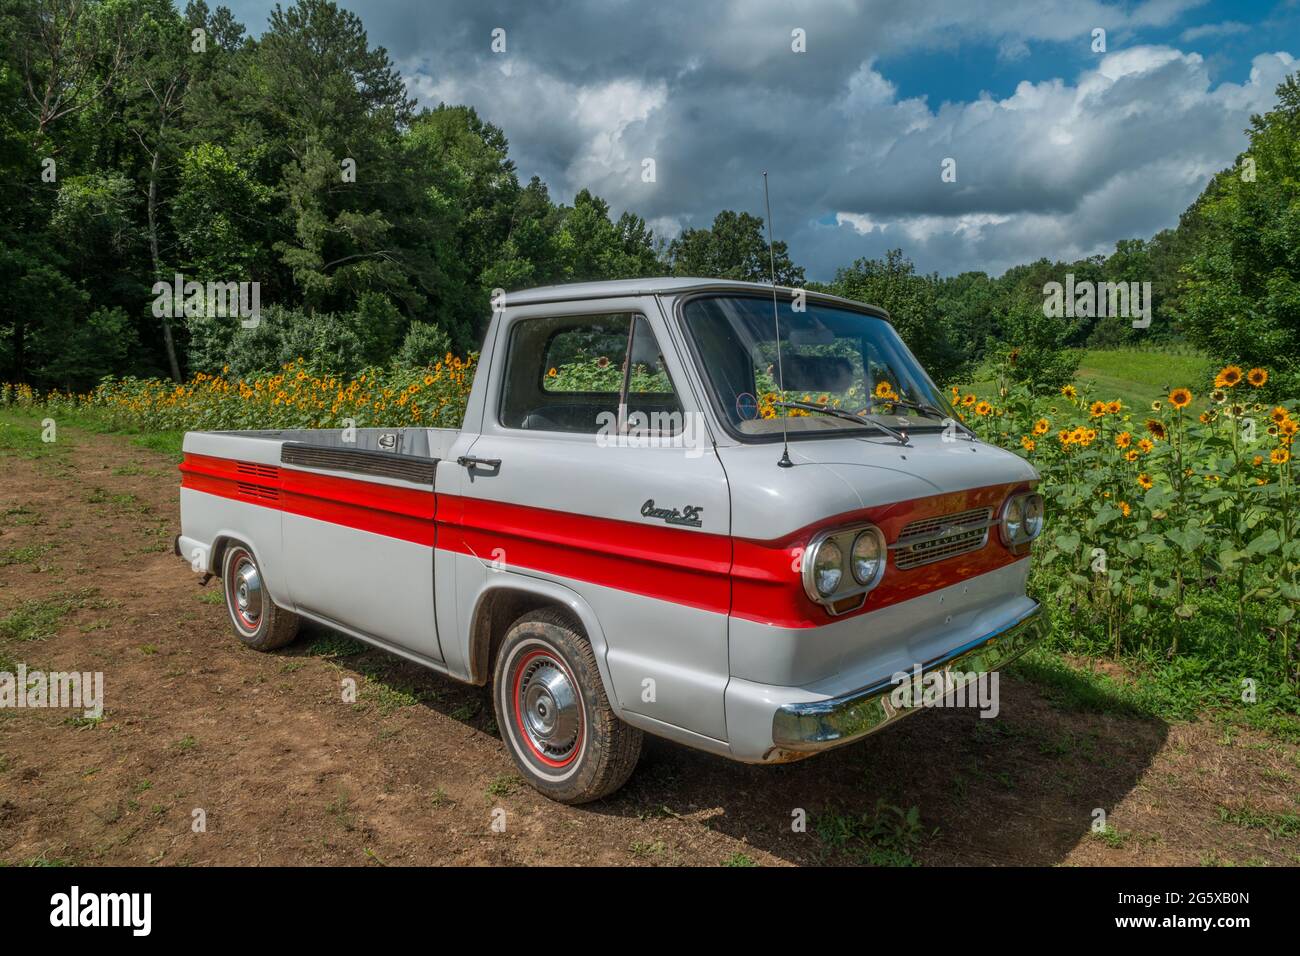 1960's Corvair truck parked in a farm field with sunflowers in bloom and woodlands in the background on a sunny cloudy day in summertime Stock Photo